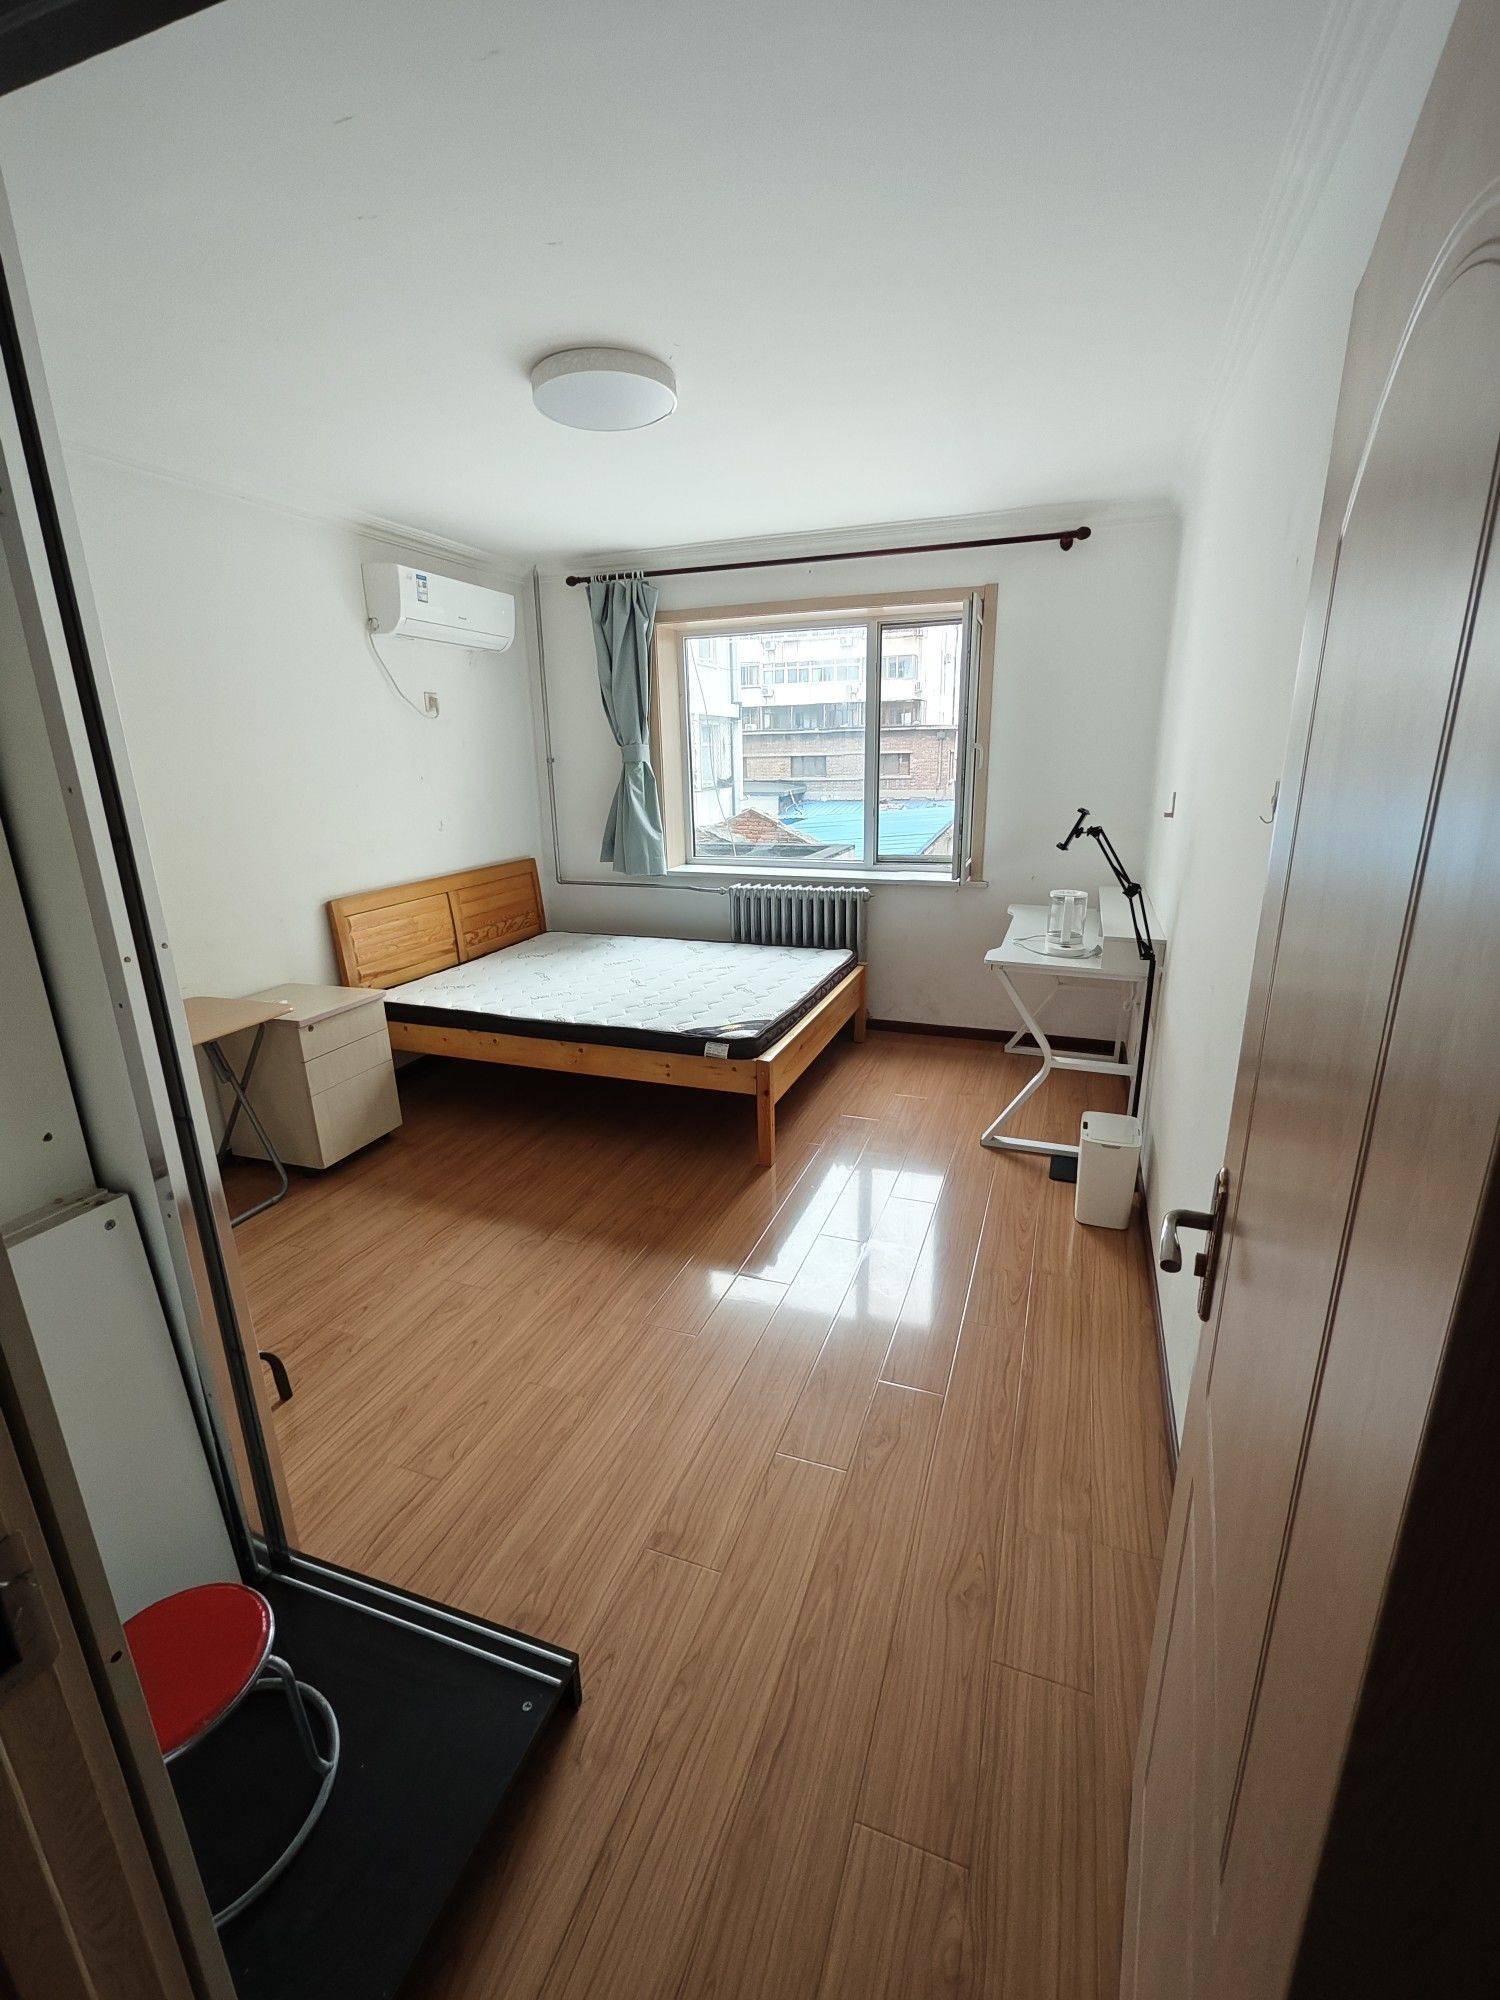 Beijing-Tongzhou-Cozy Home,Clean&Comfy,No Gender Limit,Hustle & Bustle,Chilled,LGBTQ Friendly